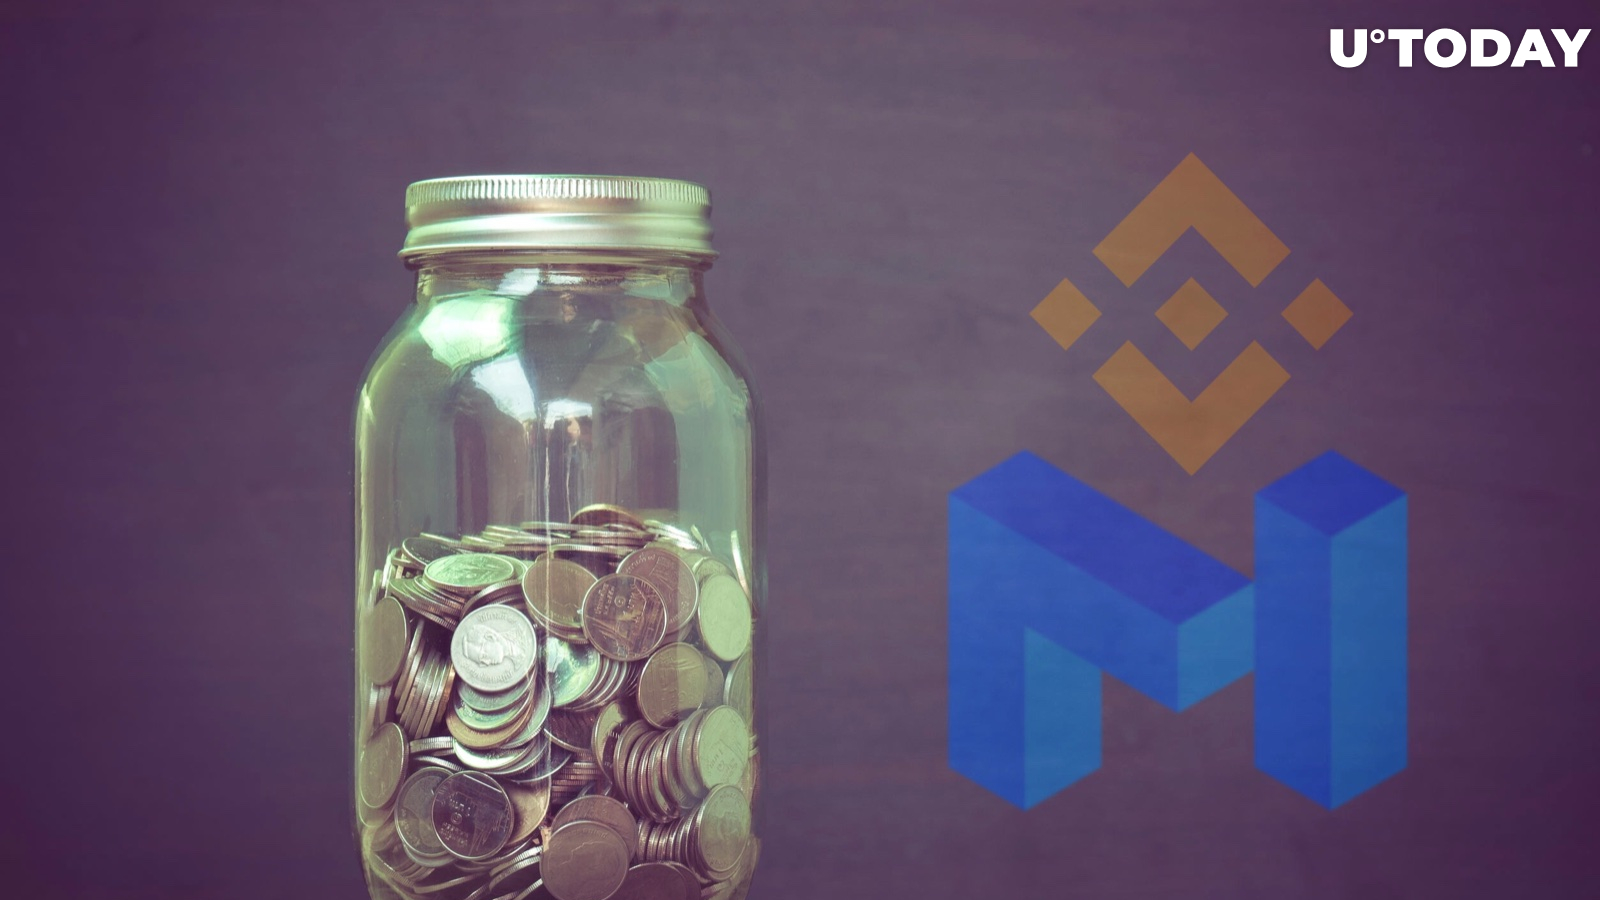 Binance Offers $60,000 in Crypto for Testing Matic Wallet